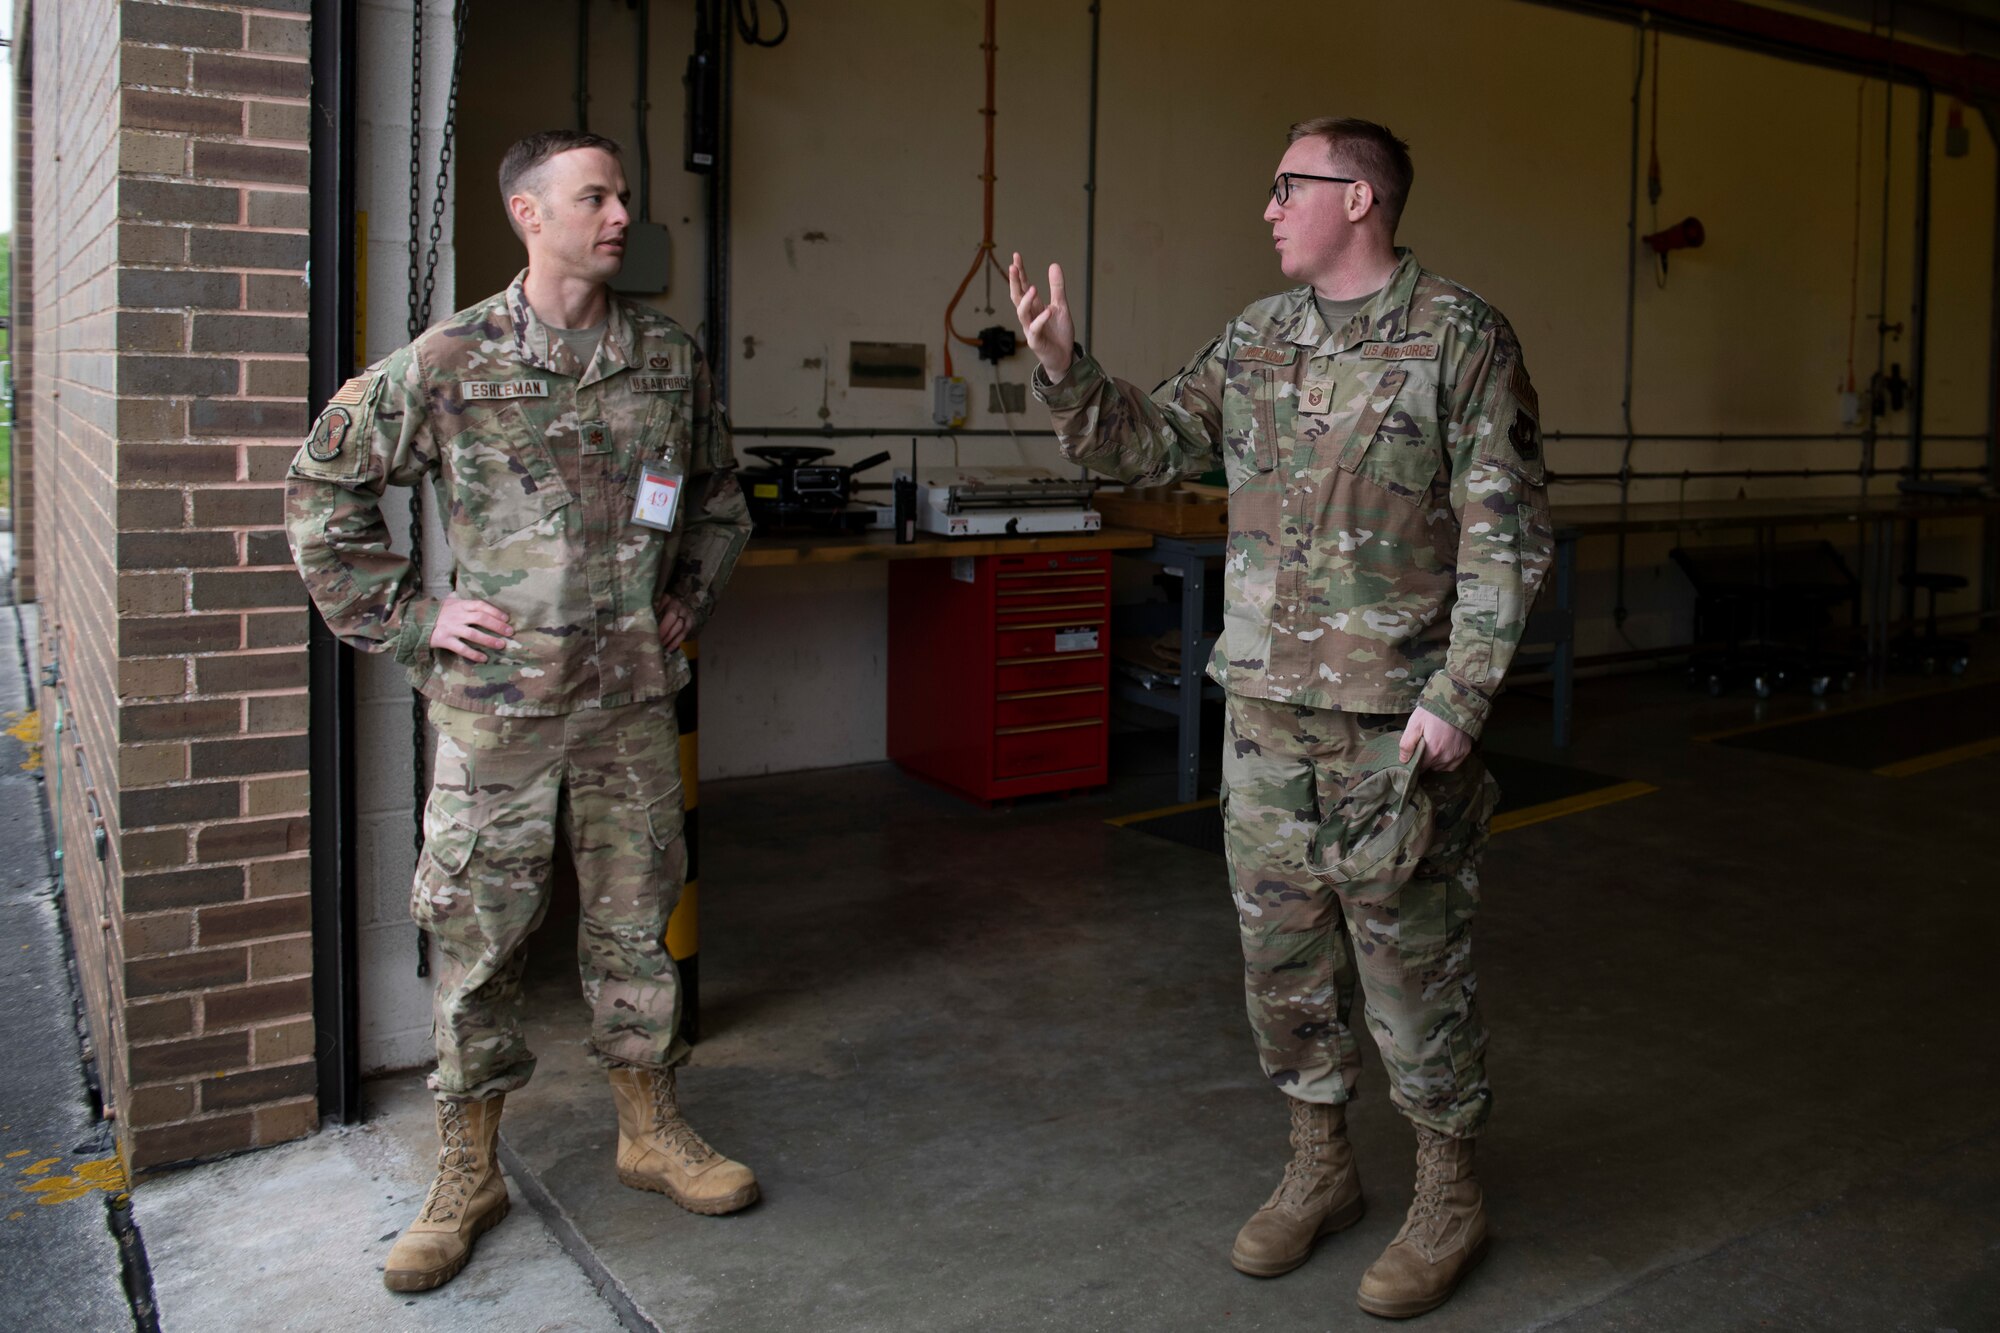 U.S. Air Force Master Sgt. Aaron Ridenour, right, 420th Munitions Squadron production flight chief, talks with Maj. Justin Eshleman, left, 423rd Civil Engineer Squadron special projects officer, at Royal Air Force Welford, England, April 27, 2022. The group attended an immersion tour at RAF Welford and RAF Fairford to orient themselves with the missions these bases provide. (U.S. Air Force photo by Senior Airman Jennifer Zima)